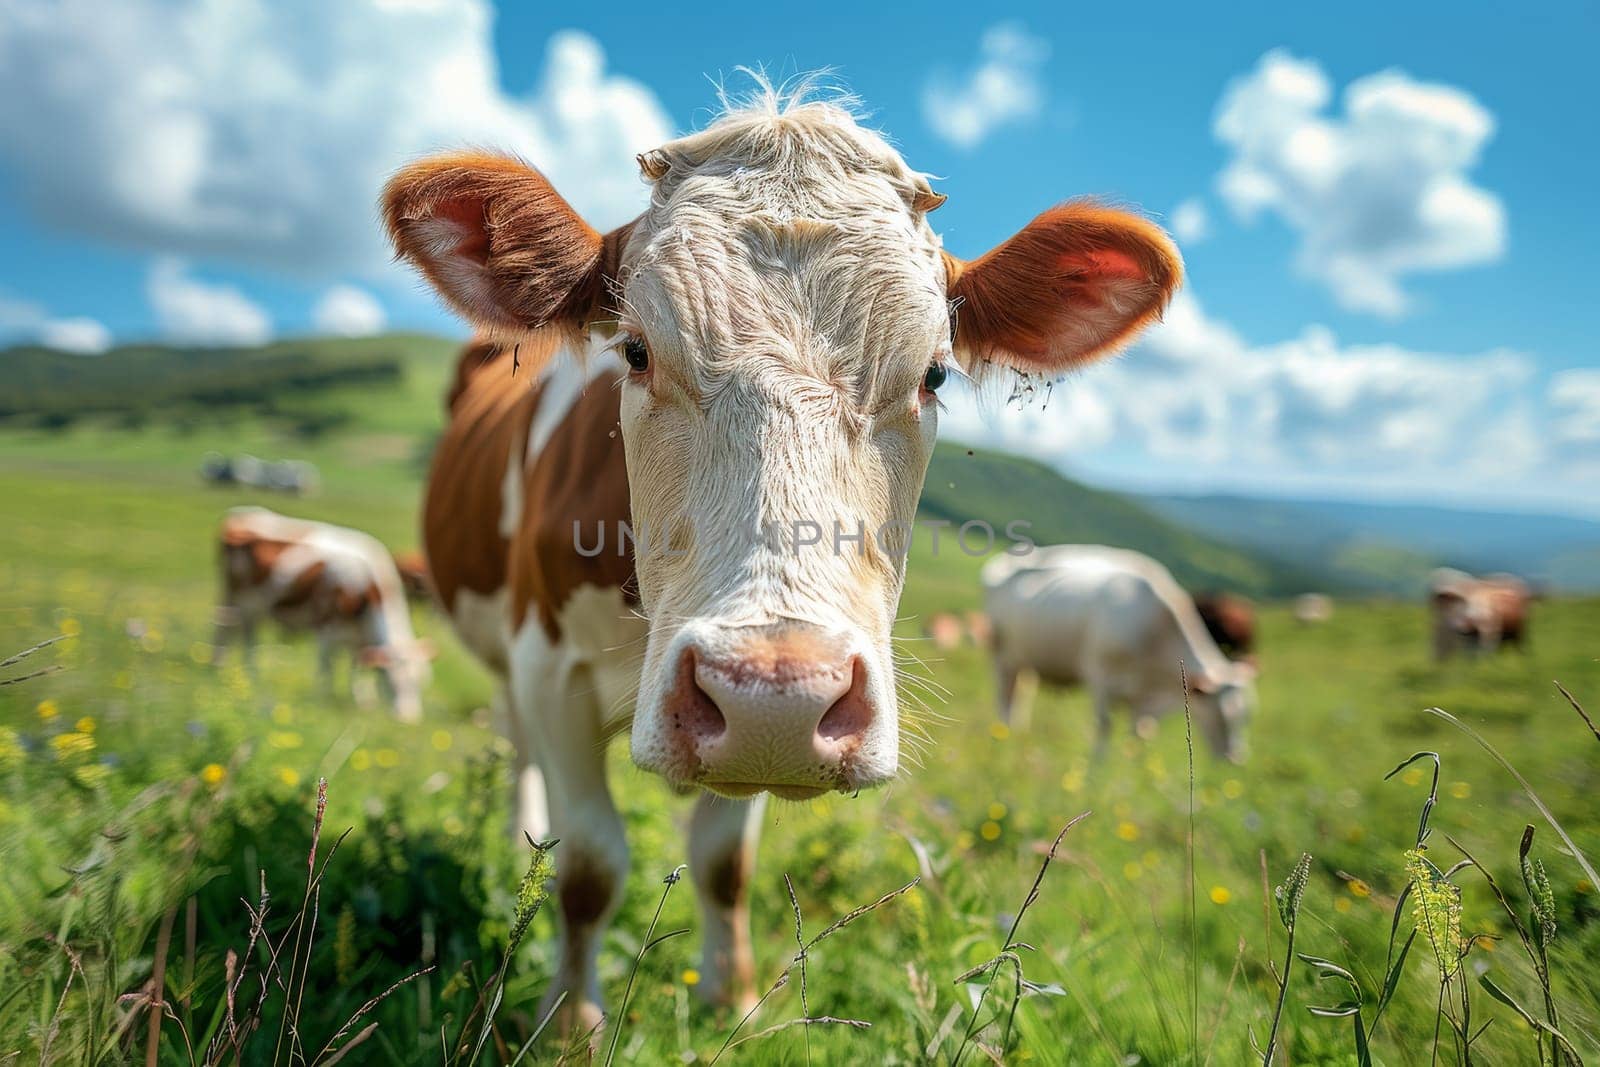 A cow is standing in a field with other cows. The cow is looking at the camera